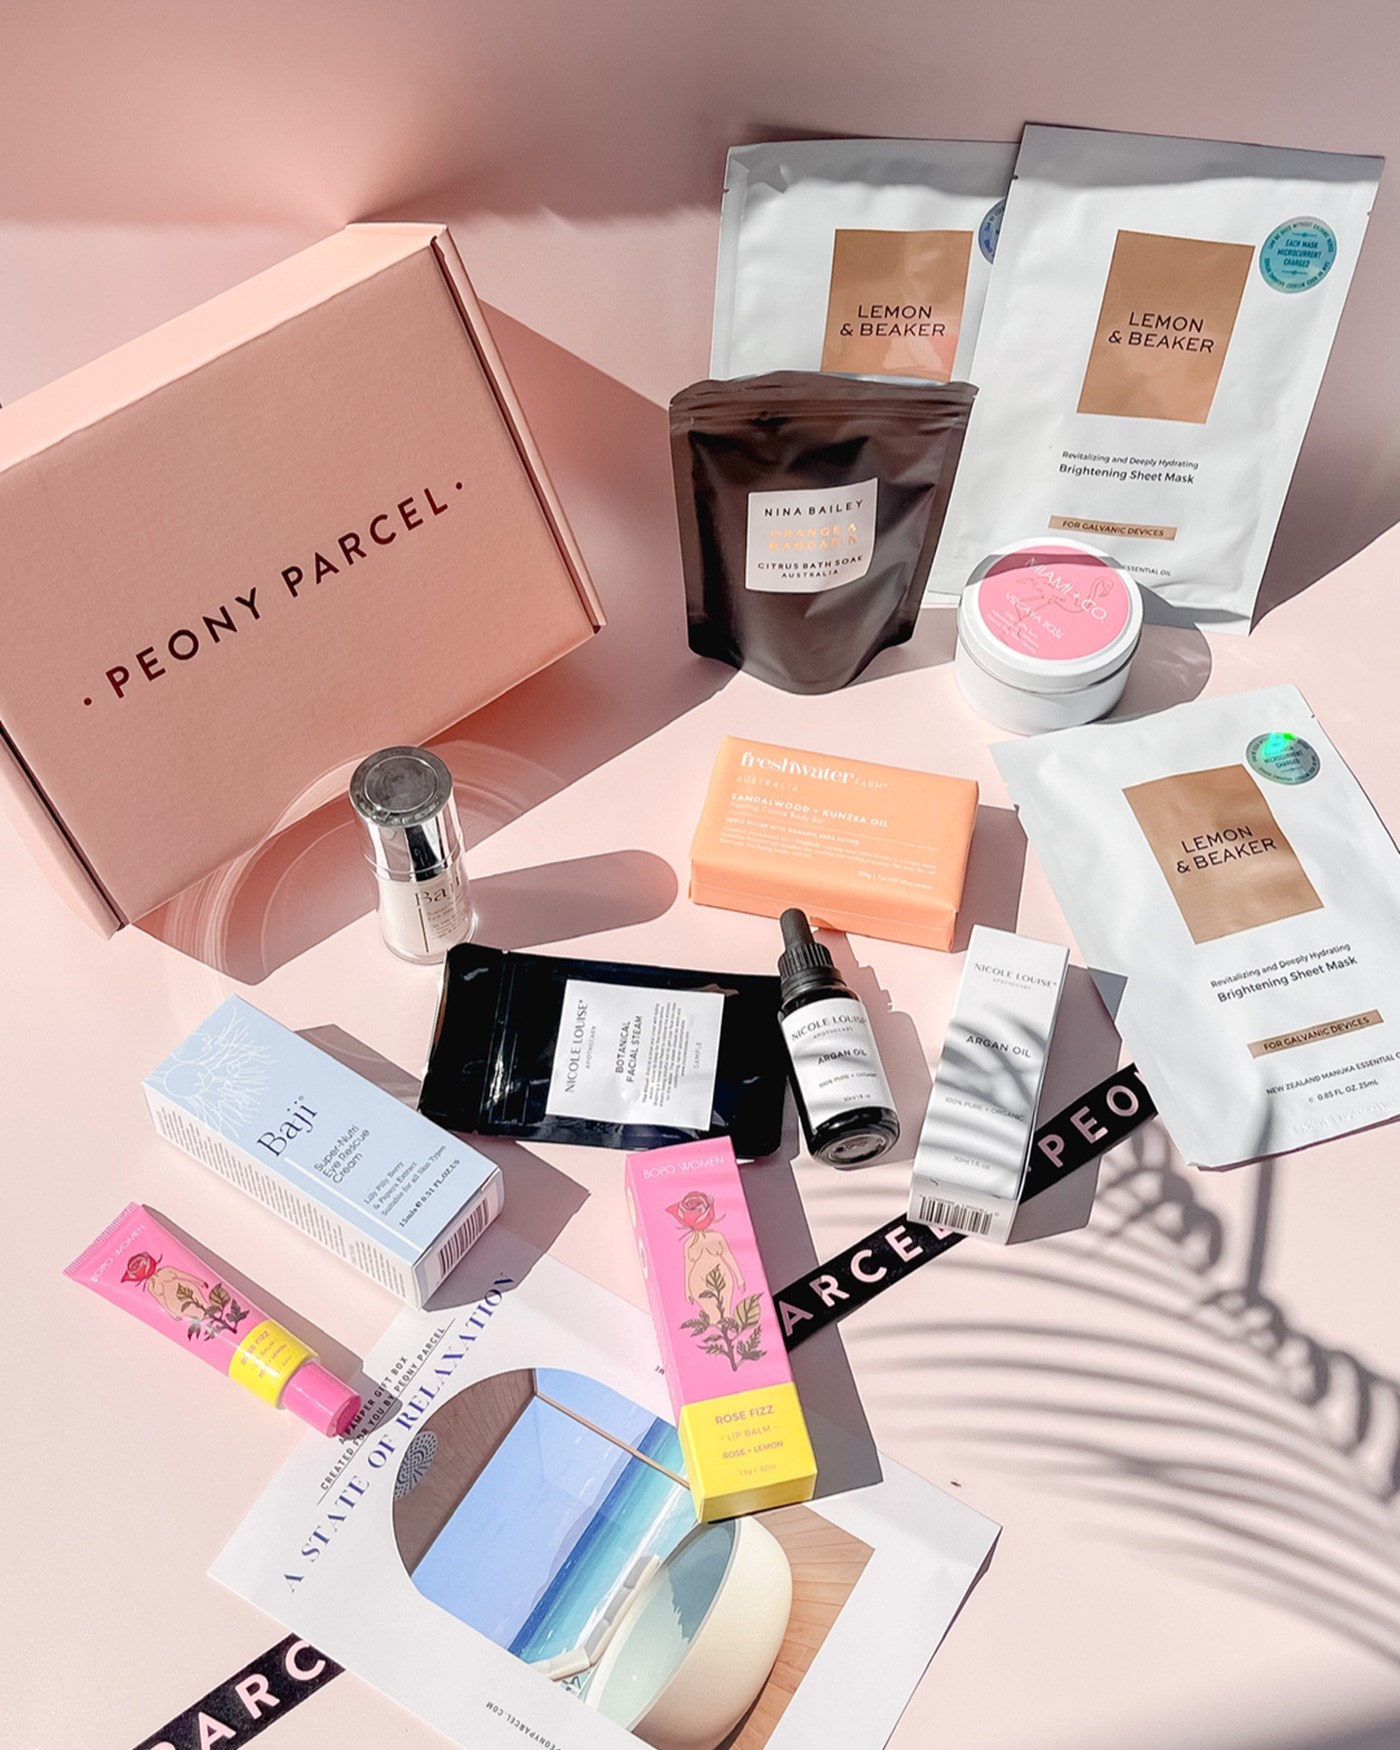 A gift subscription box from Peony Parcel with a slew of beauty goodies.